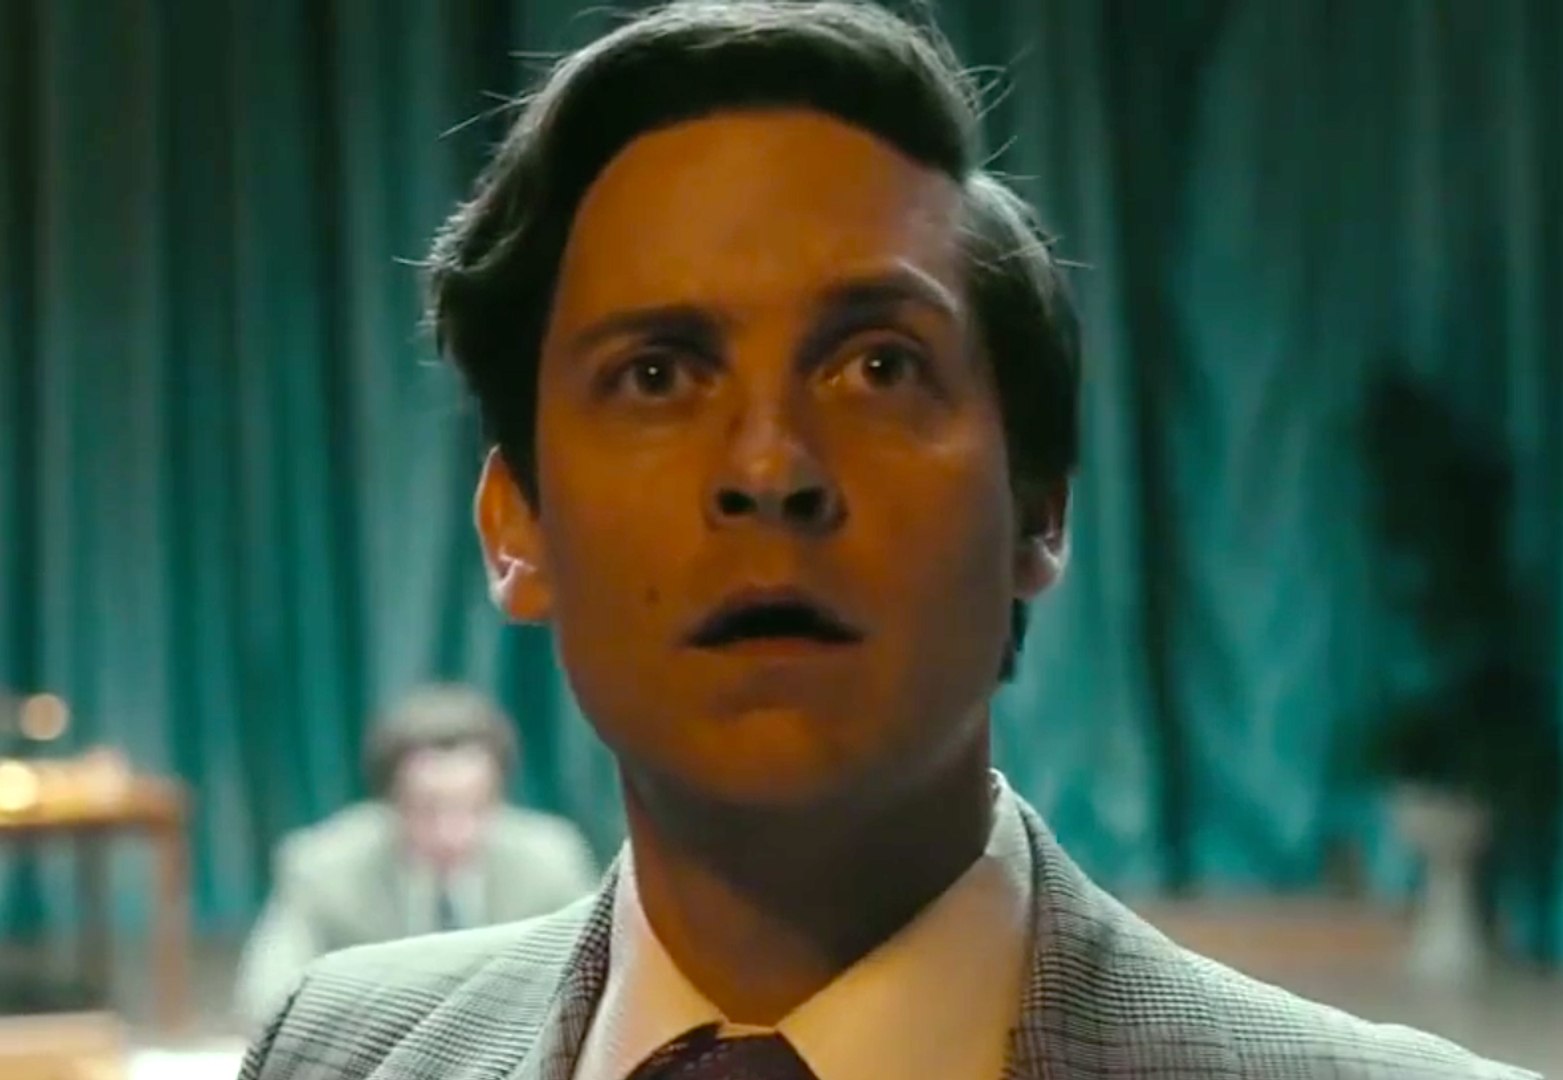 Movie Review: Pawn Sacrifice (2015) *Still Searching for Bobby Fischer*